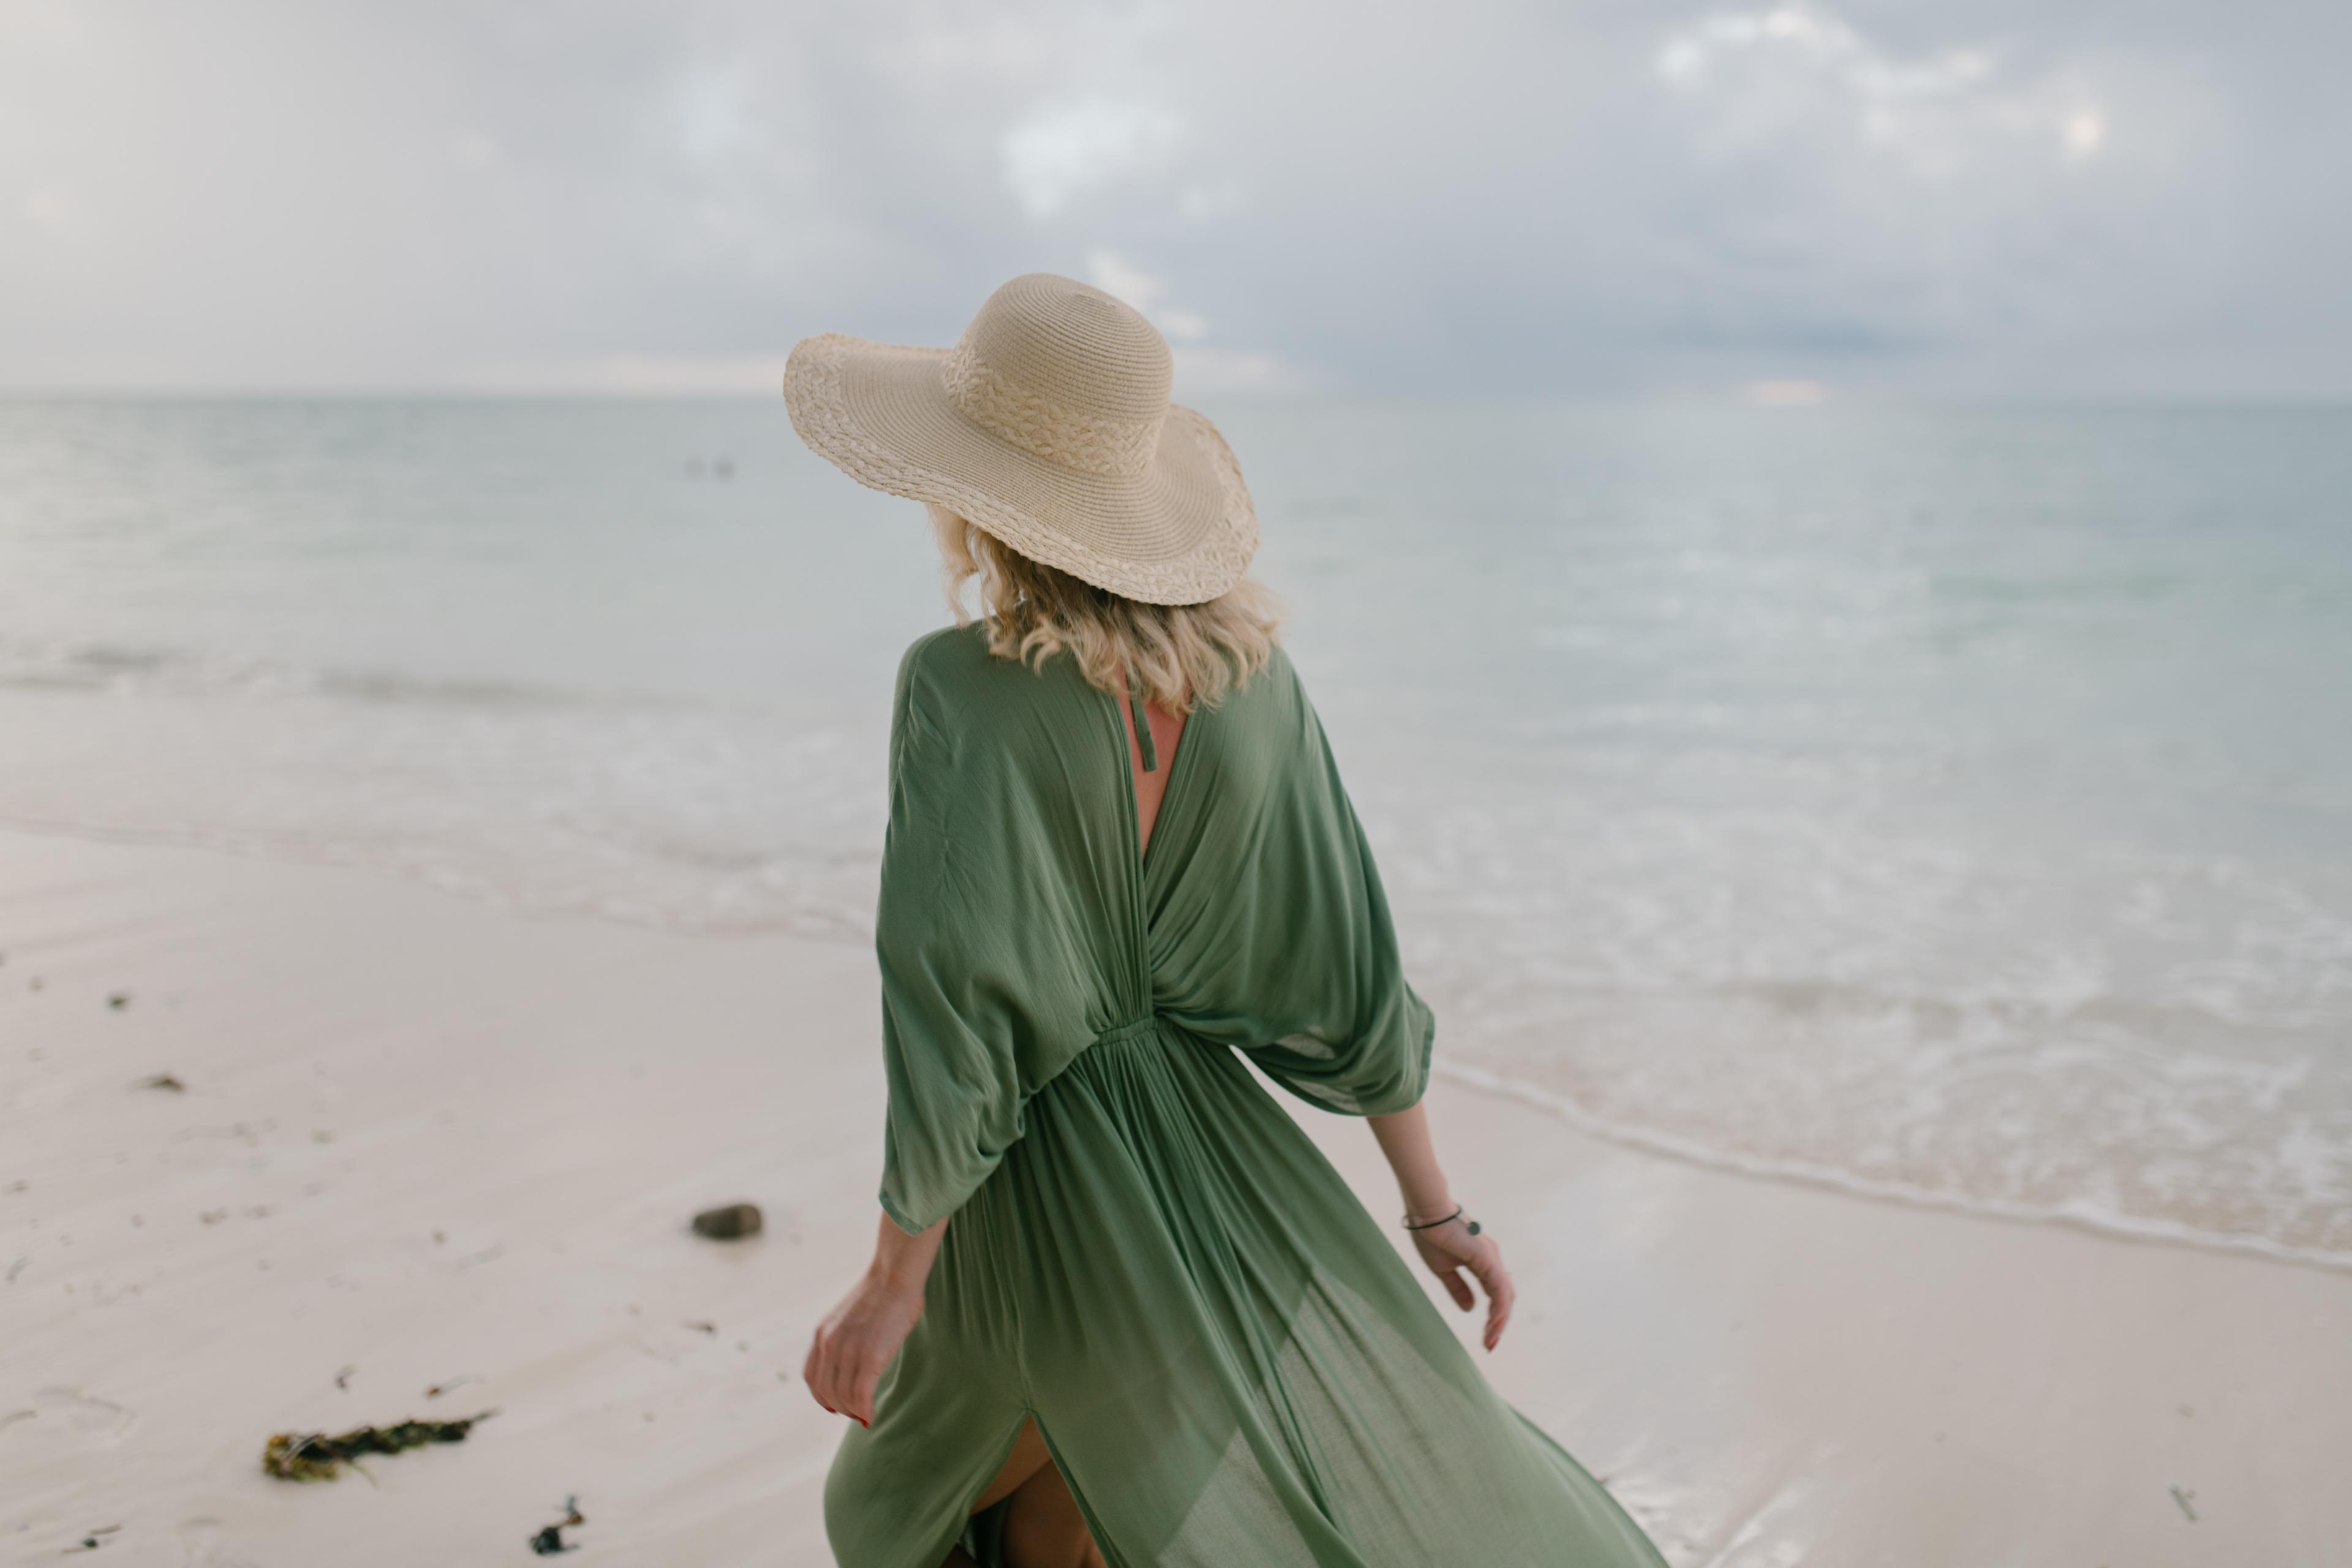 Woman in green dress walking away from camera on a beach.